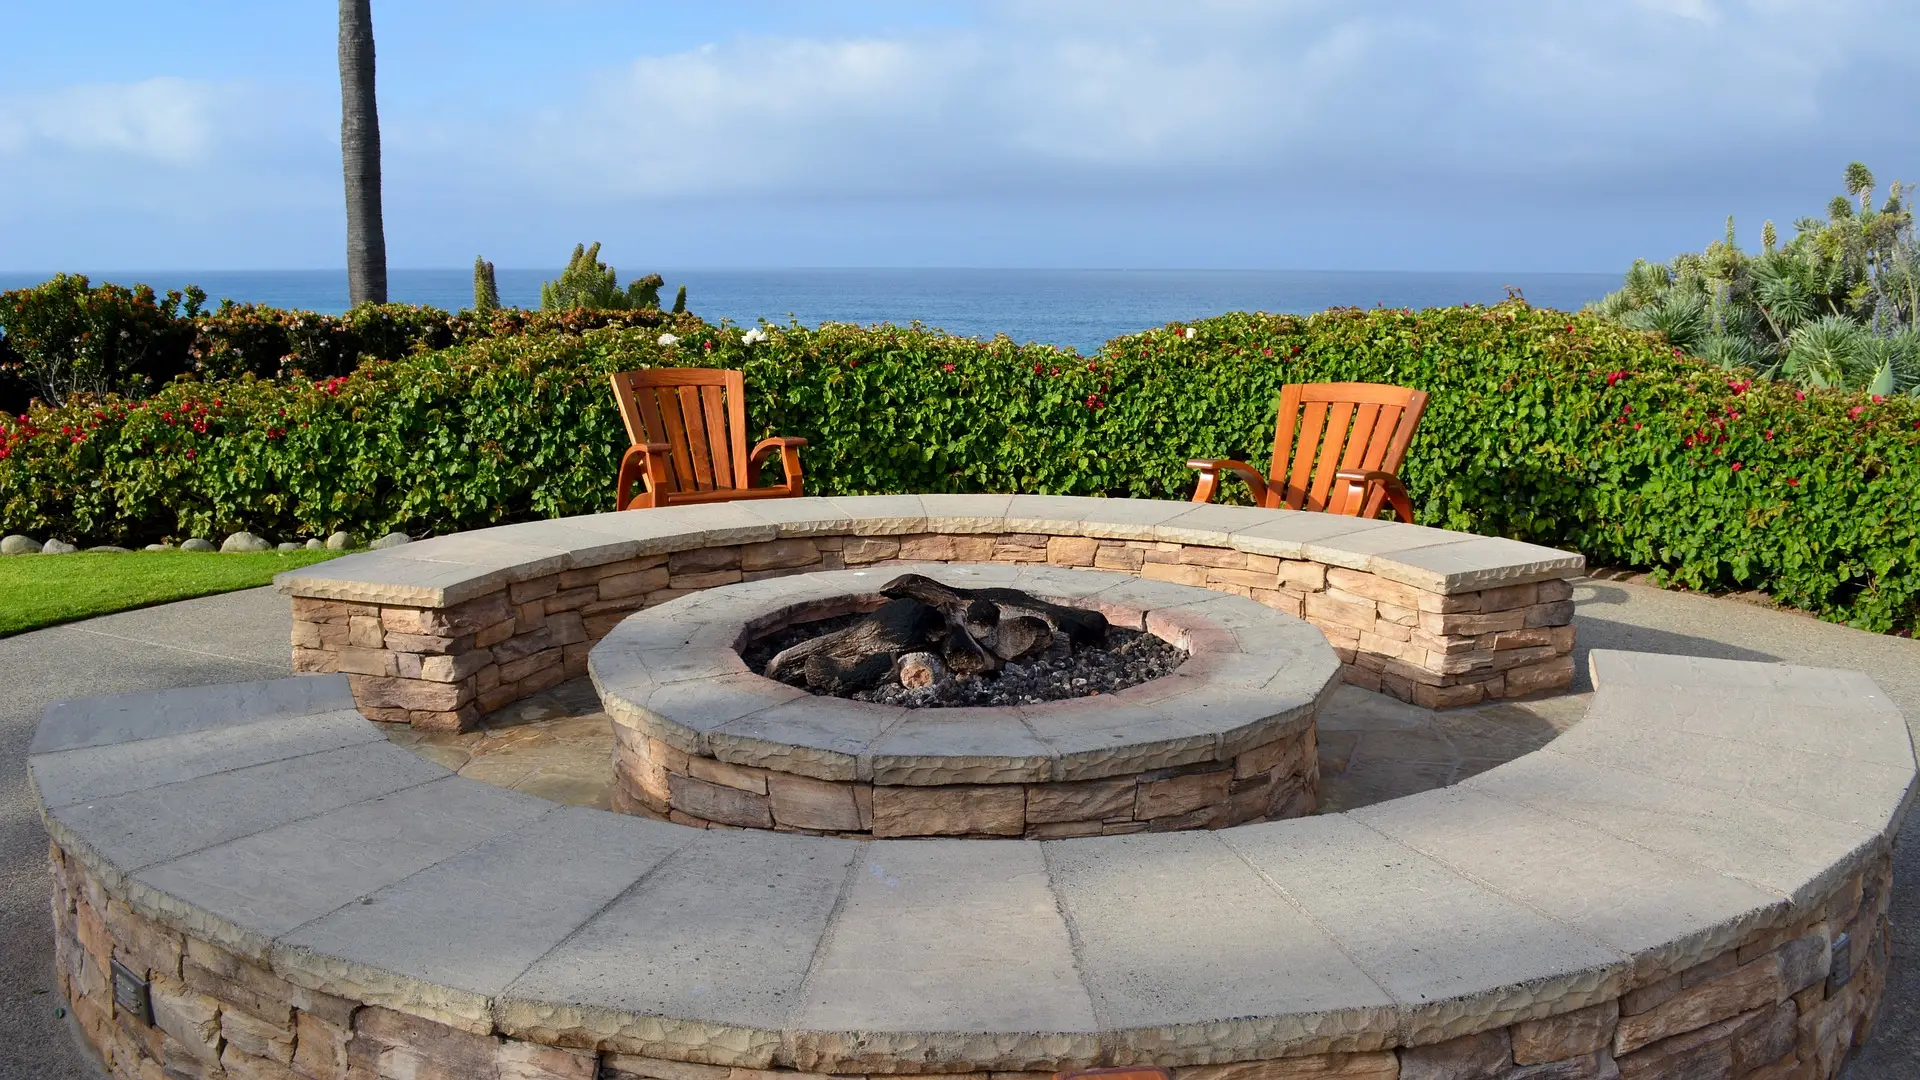 Can You Put A Fire Pit On Concrete, How Do You Build A Fire Pit On Concrete Slab